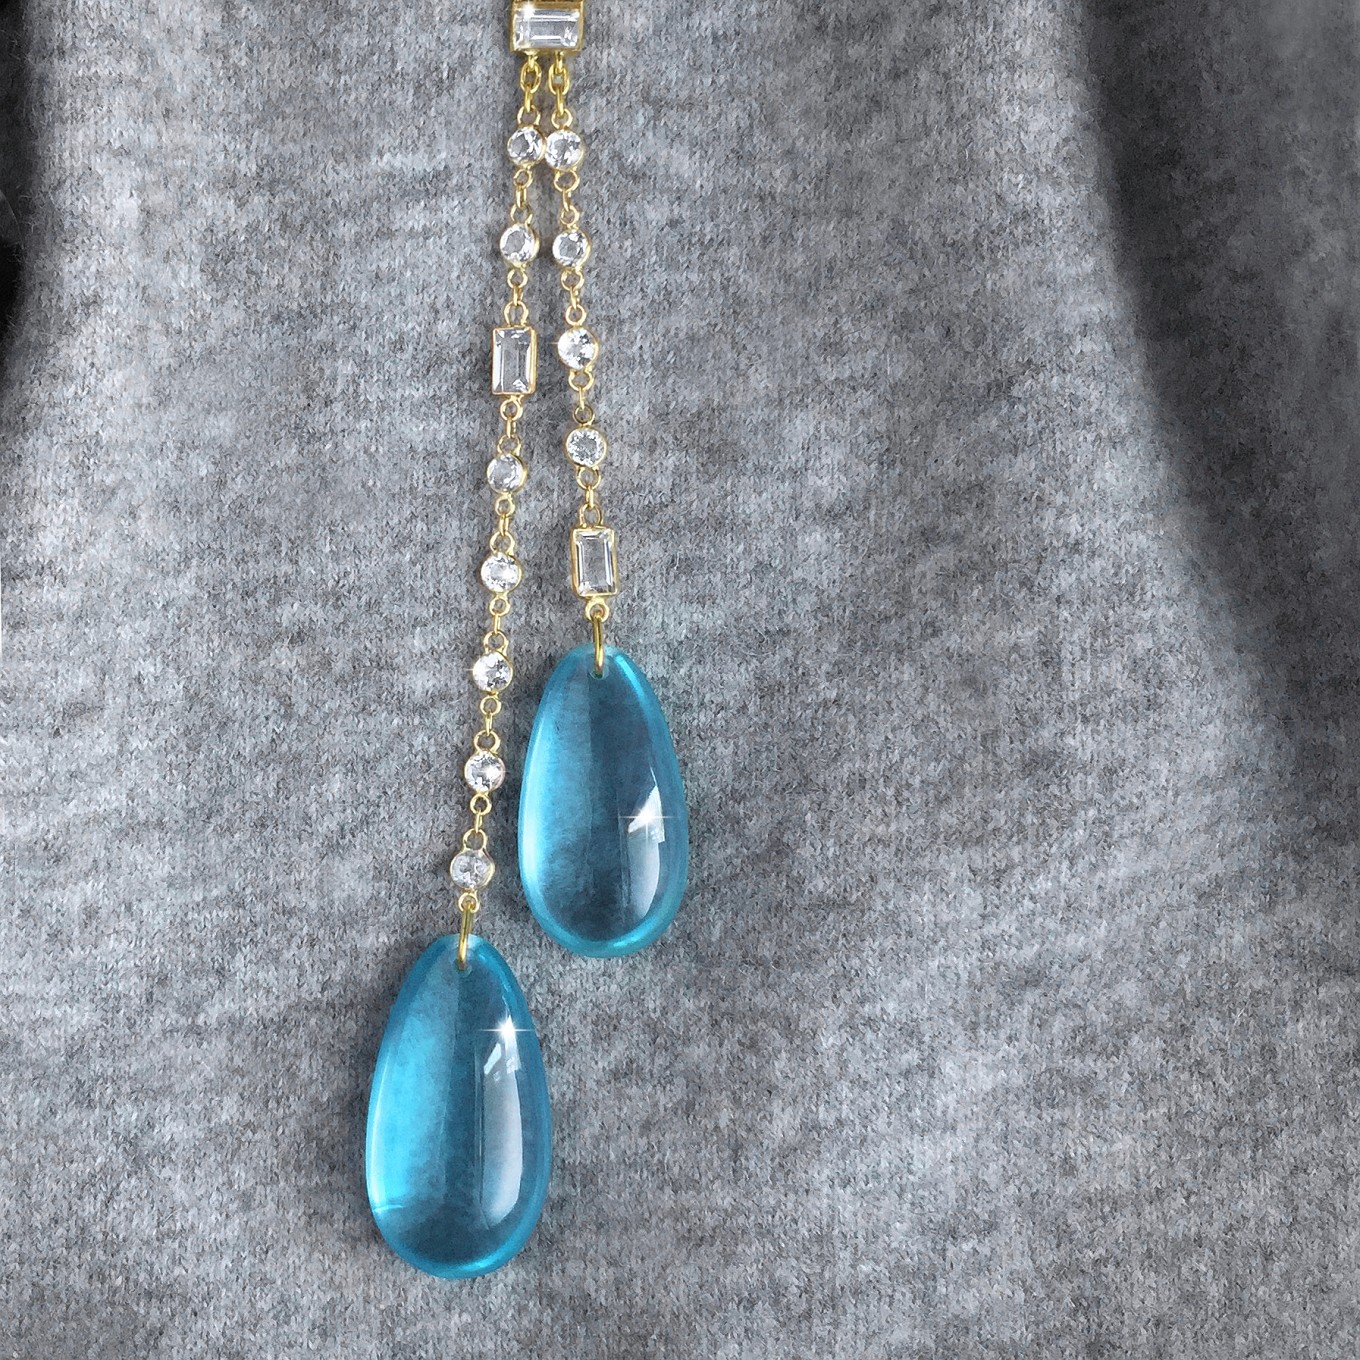 AQUAMARINE  33.63 CTS  TEARDROP NECKLACE WITH YELLOW GOLD & WHITE TOPAZ  CHAIN